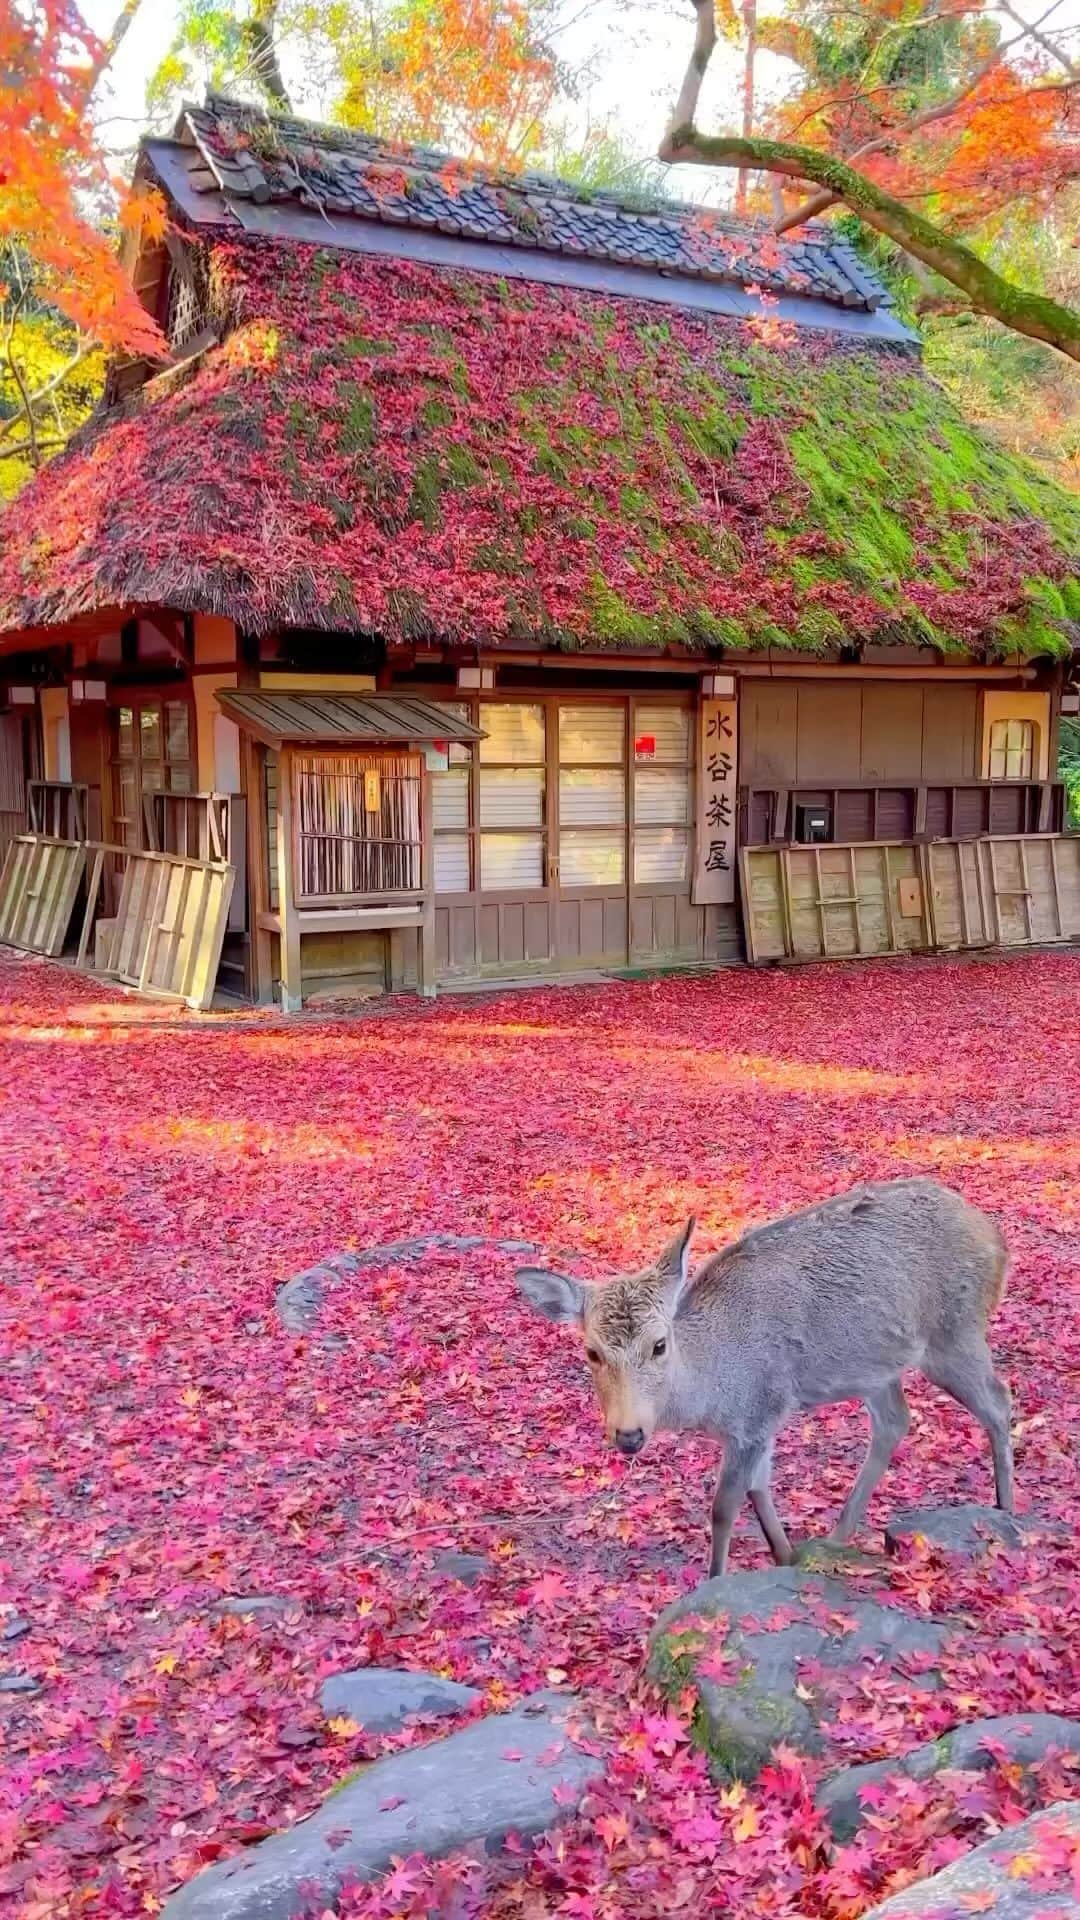 Awesome Wonderful Natureのインスタグラム：「Nara Park in Japan by @1min.traveller 🥰🍁 . Nara Park is a famous public park located in Nara, Japan. It is known for its picturesque scenery, historic landmarks, and the large population of free-roaming deer that are considered sacred and protected. Visitors can enjoy the beautiful natural surroundings, feed the deer, and explore the nearby temples and attractions.  Nara Park is exceptional beautiful during fall season.  Best time to visit is in late November and early December. Tag who you’d go with! 😍🙌🏼 . 📹 by @1min.traveller✨ 📍Nara Park, Nara Prefecture - Japan 🇯🇵」